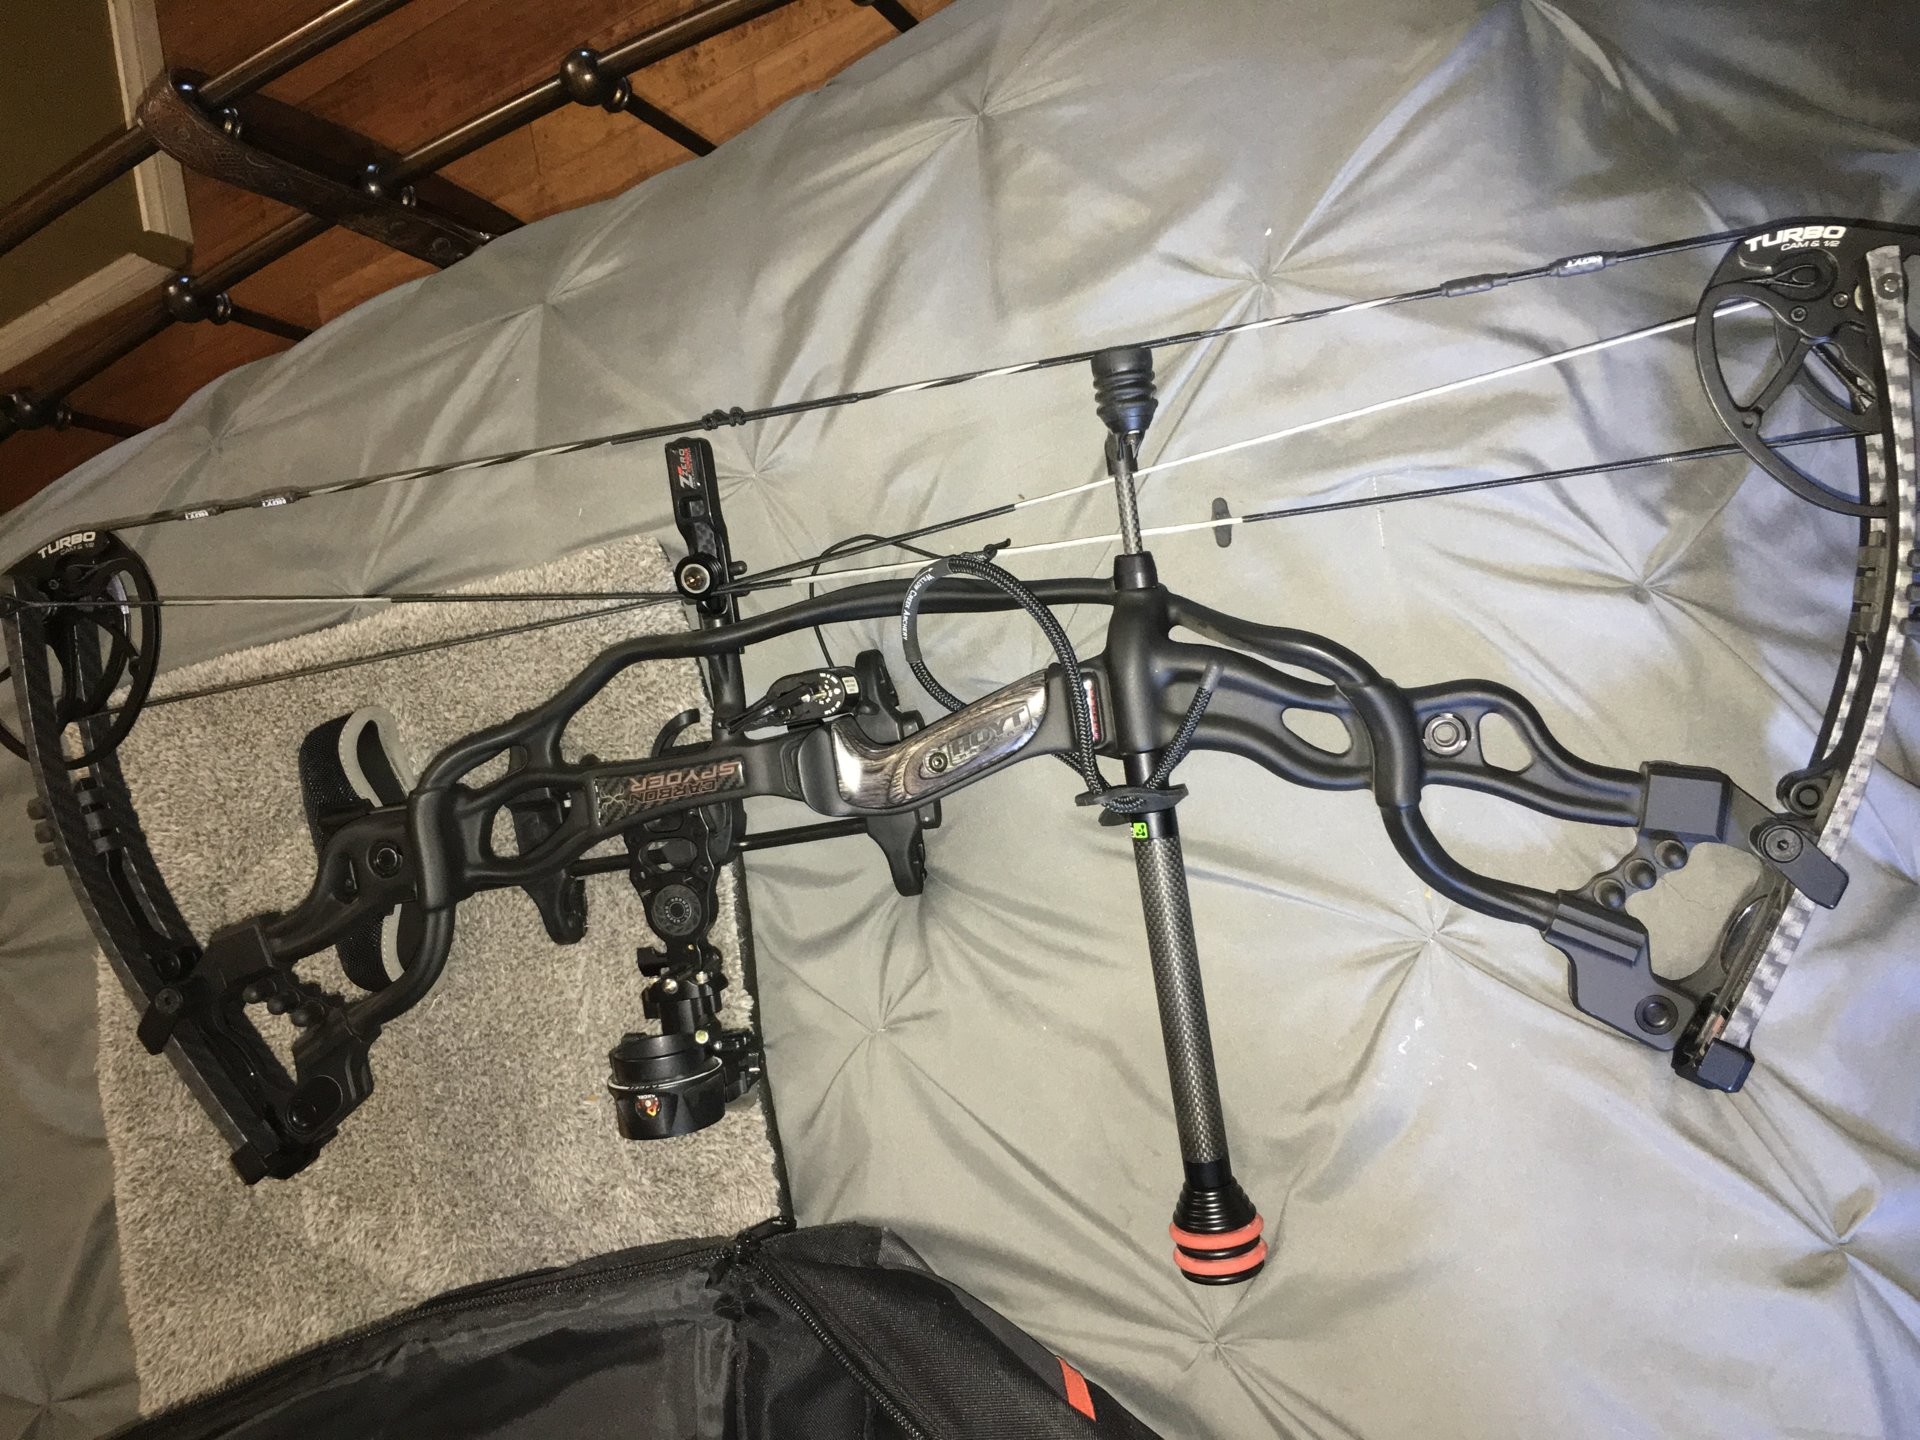 1920x1440 2015 Hoyt carbon spyder compound bow complete with bag arrows and hard case  for arrows this bow is badass everything is brand-new do you not have time  to ...